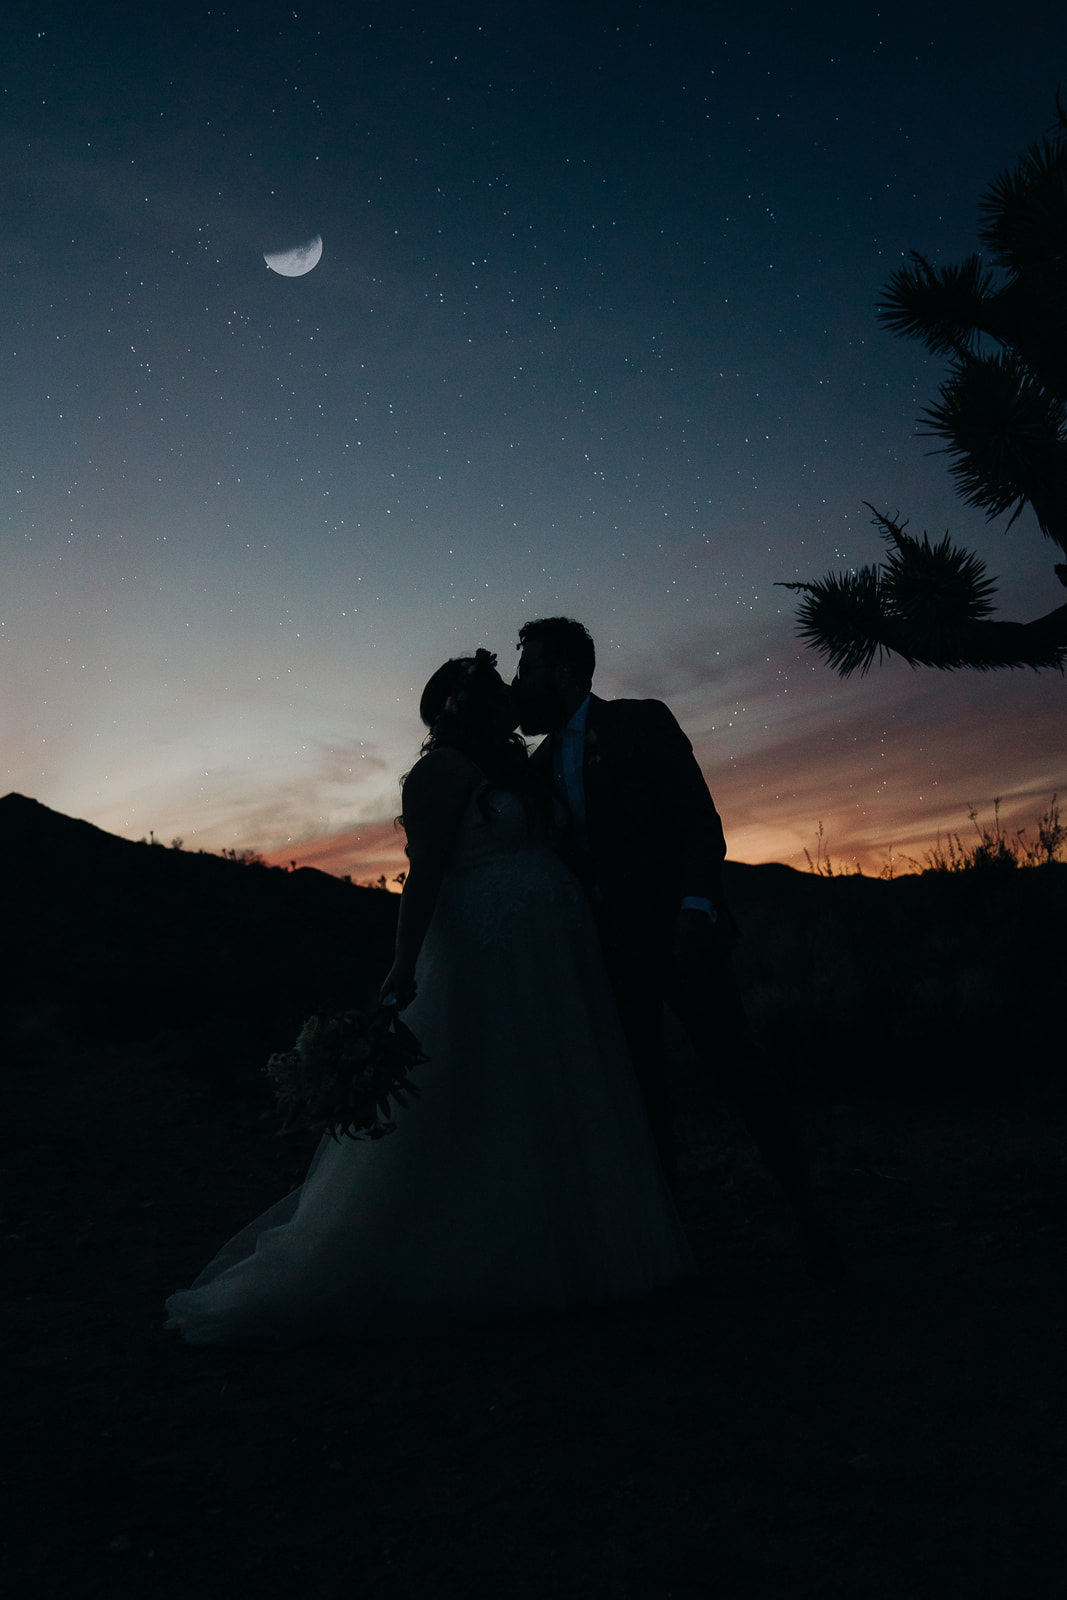 Desert Elopement Silhouette with a Joshua Tree